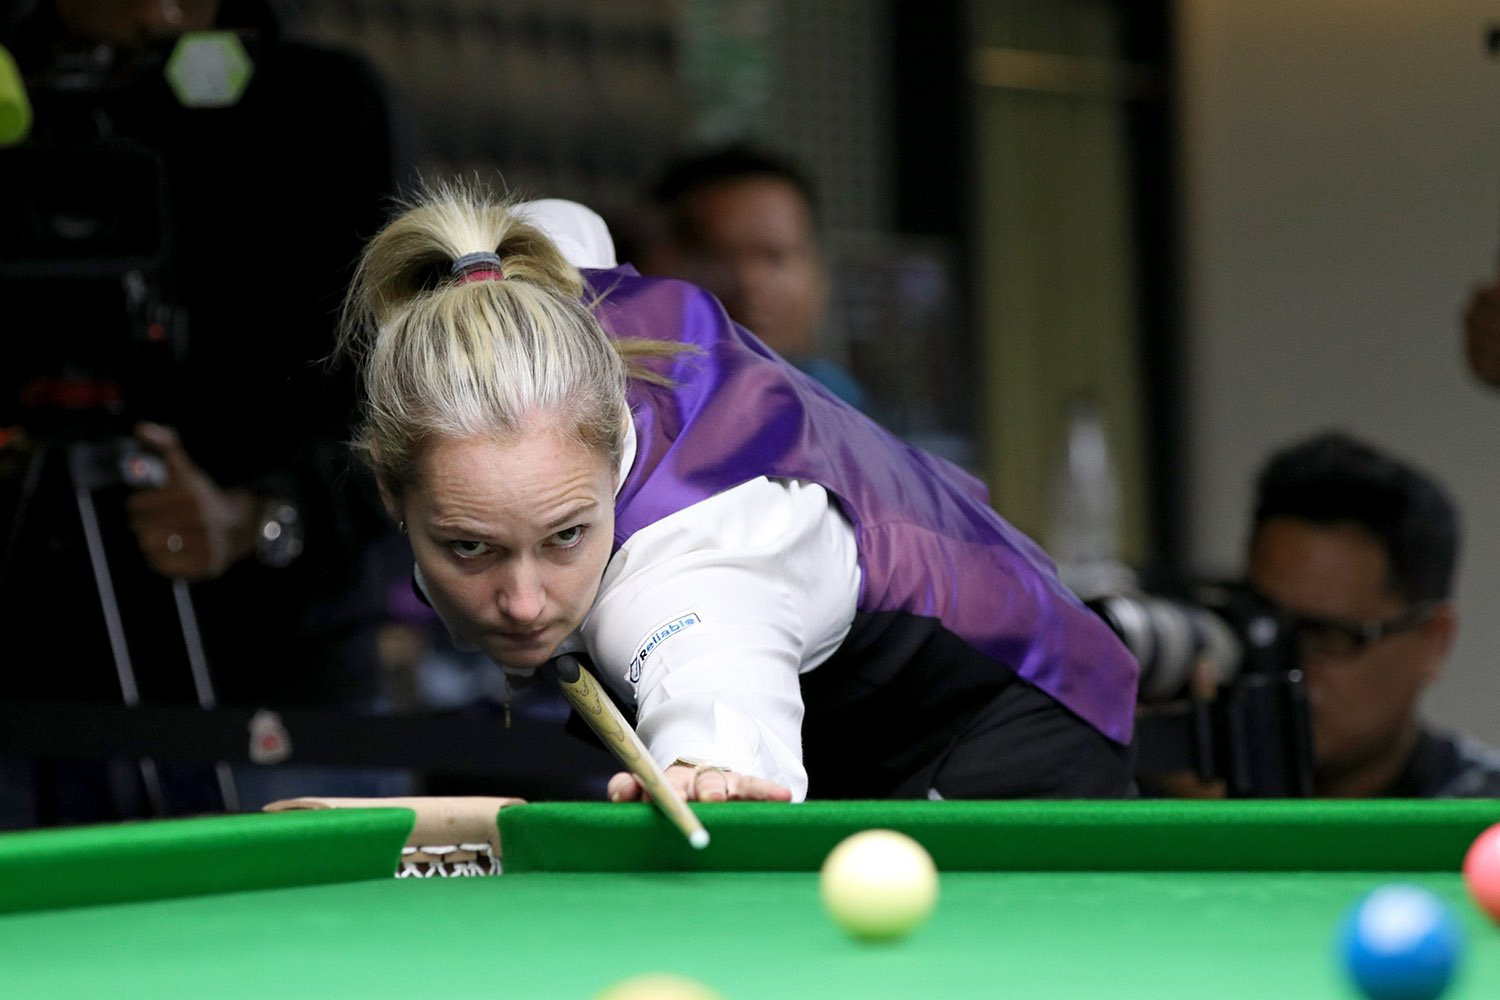 Evans wins record 12th World Women's Snooker Championship after seeing off challenge of Wongharuthai